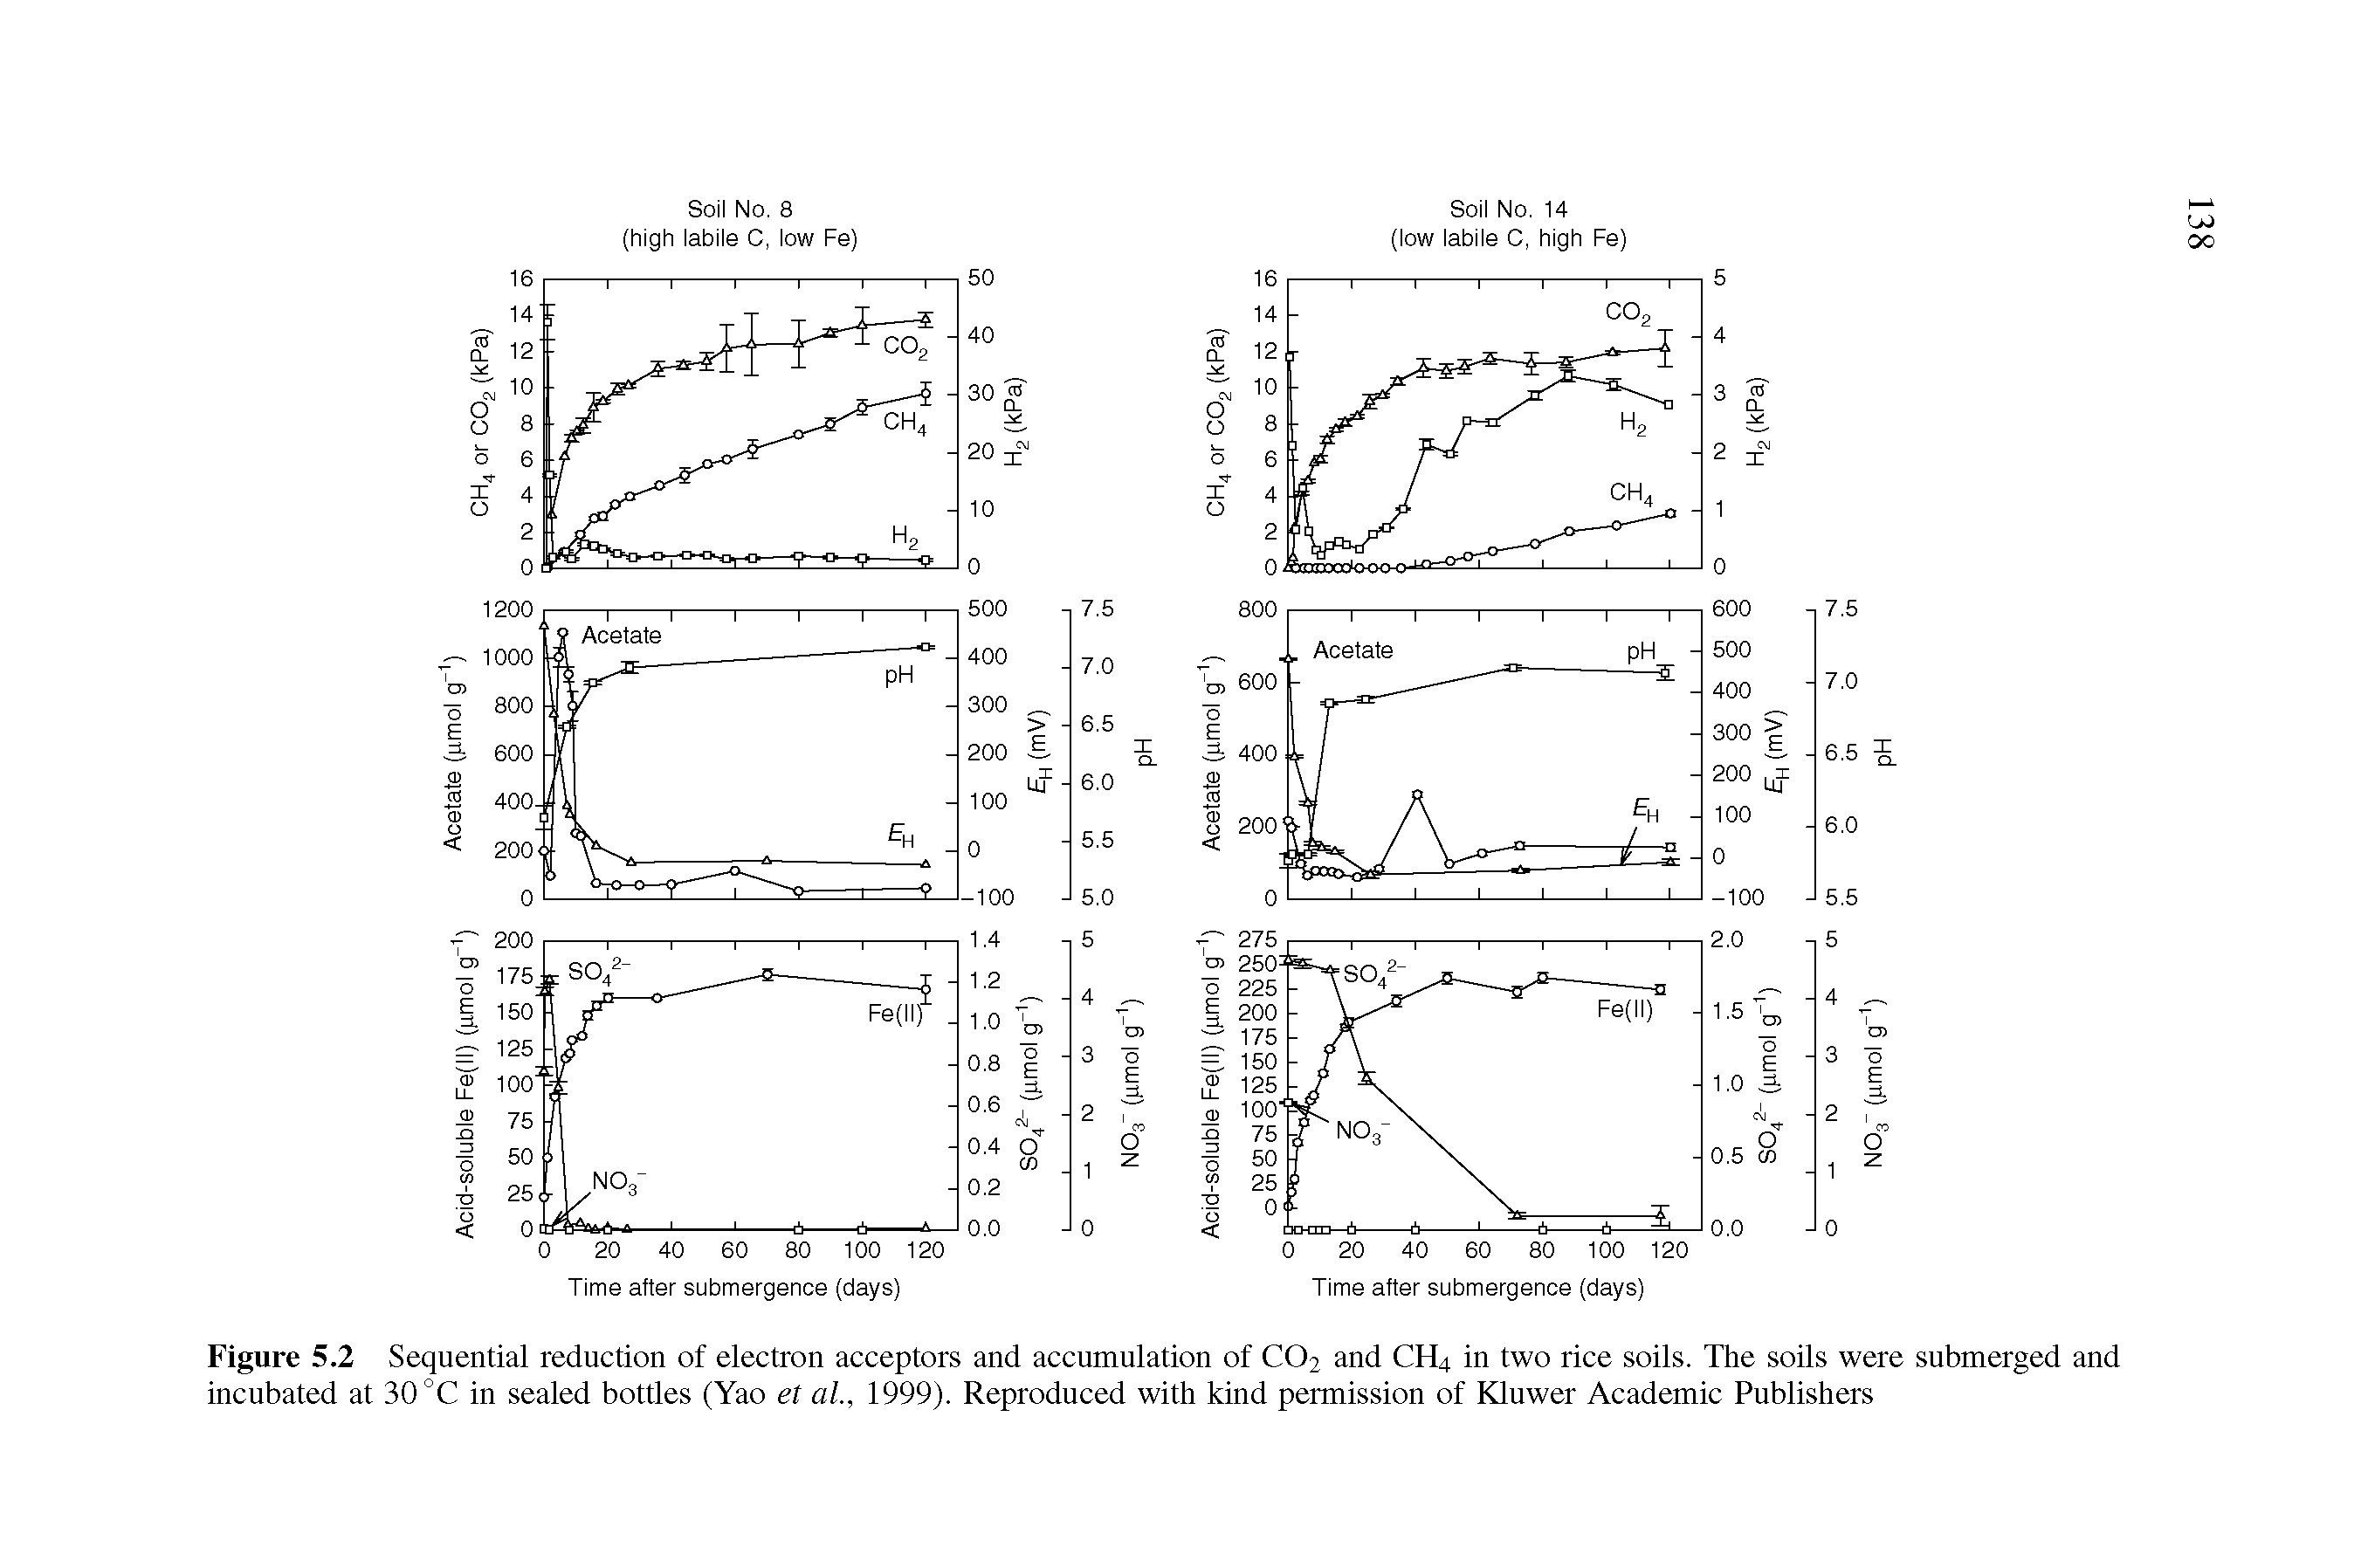 Figure 5.2 Sequential reduction of electron acceptors and accumulation of CO2 and CH4 in two rice soils. The soils were submerged and incubated at 30 °C in sealed bottles (Yao et al, 1999). Reproduced with kind permission of Kluwer Academic Publishers...